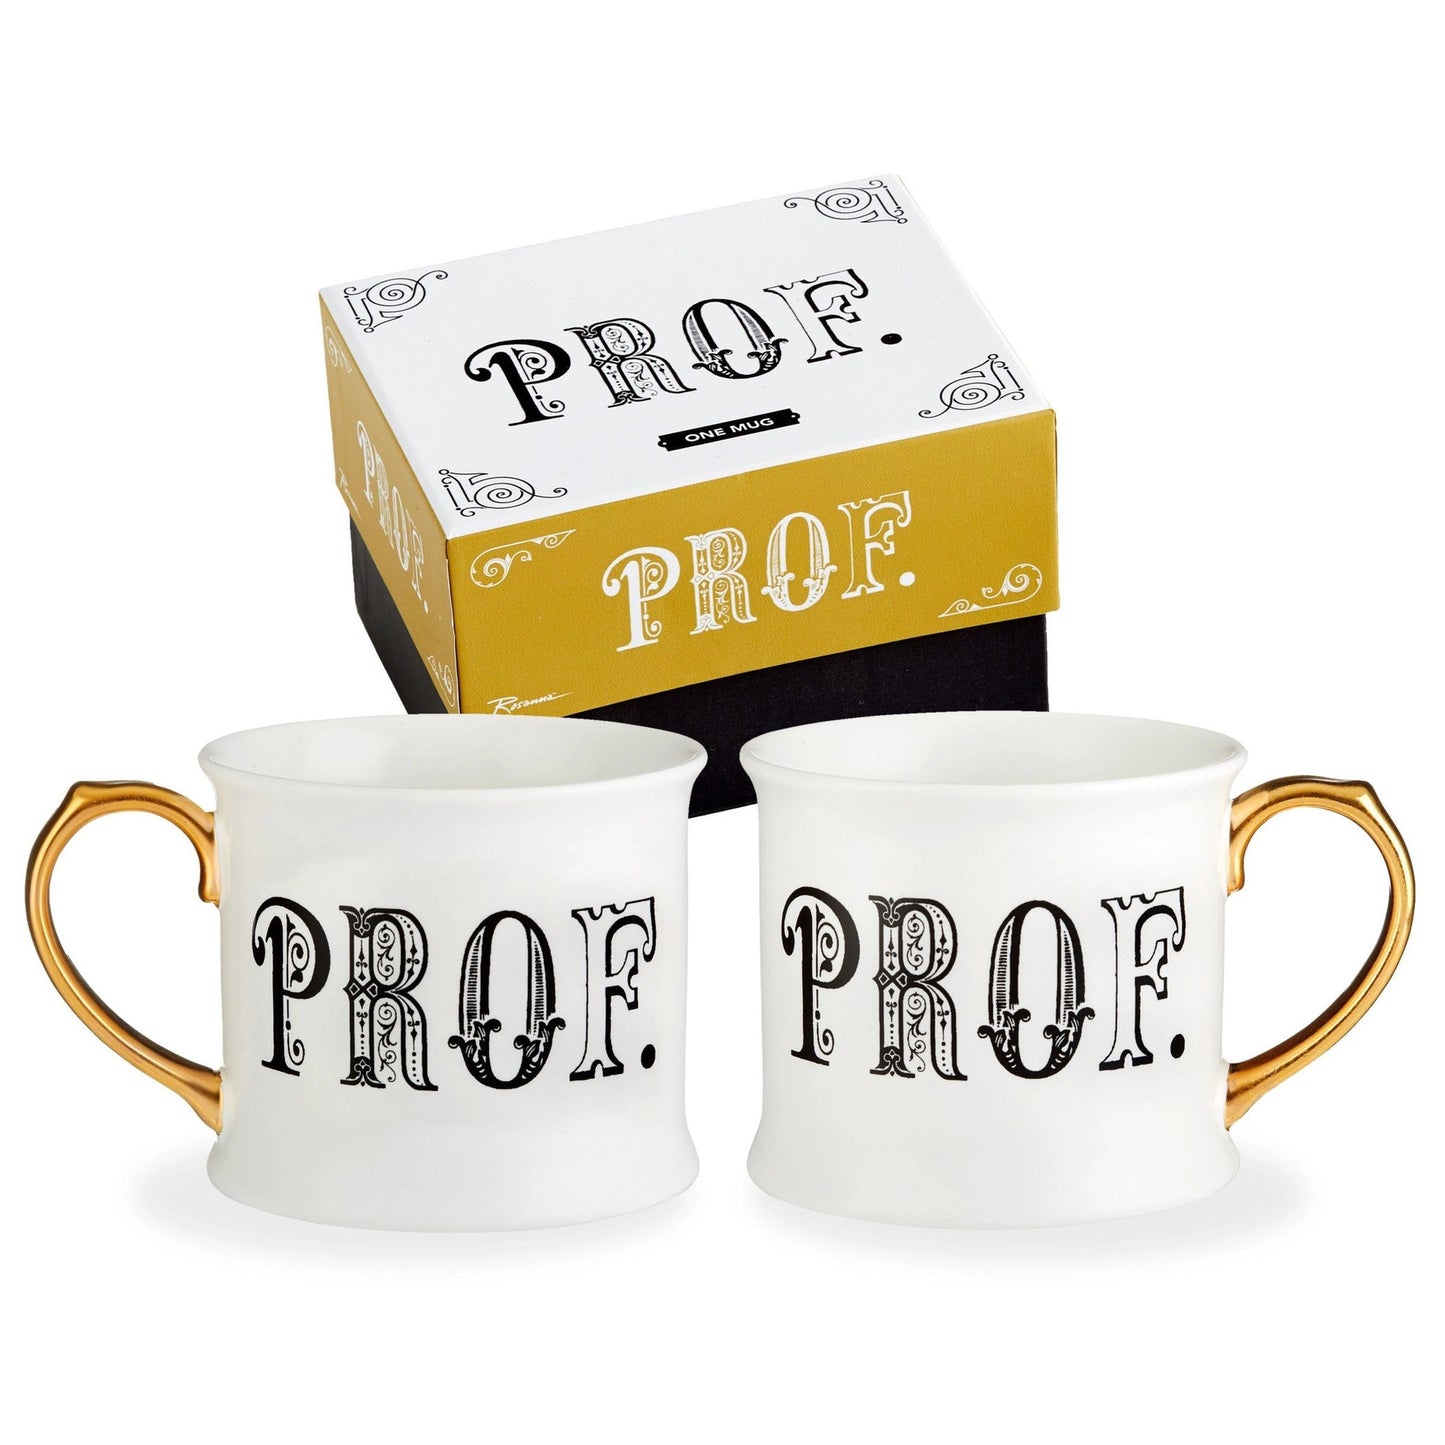 Prof. Lithographie Mug in Porcelain with Gilded Handle